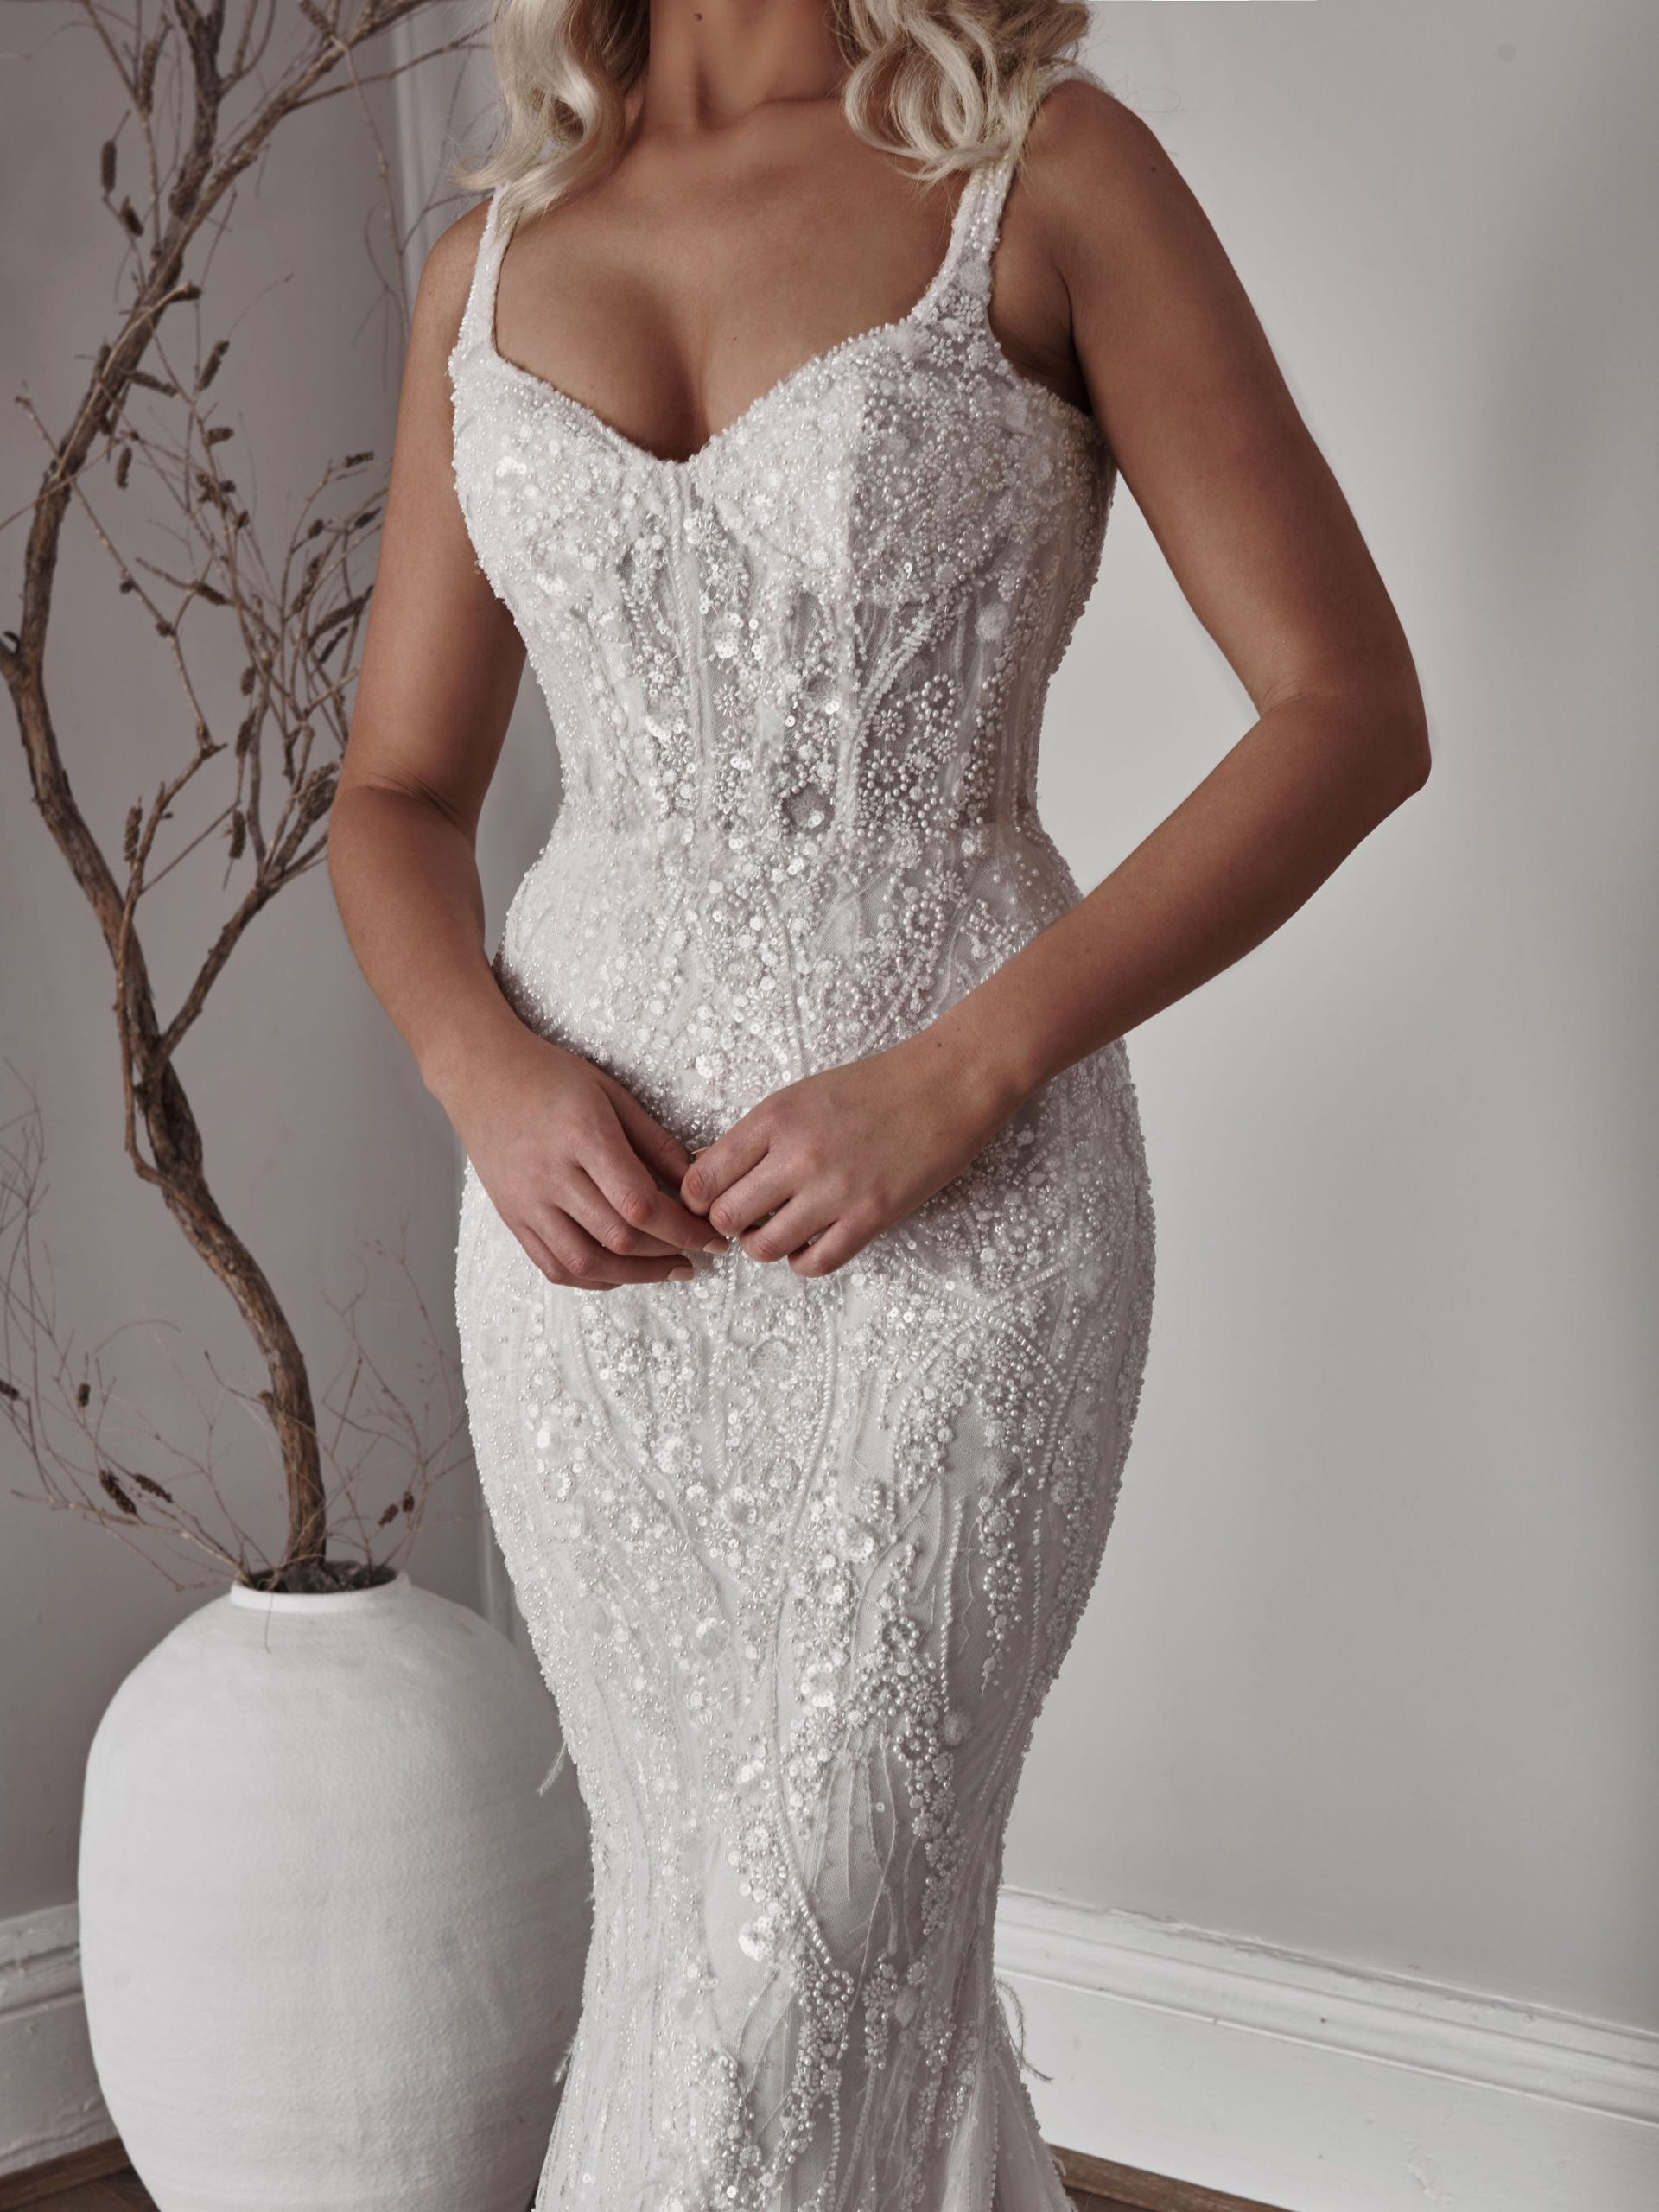 Chic and Sexy Beaded Fit-and-Flare Gown by Blanche Bridal - Image 3